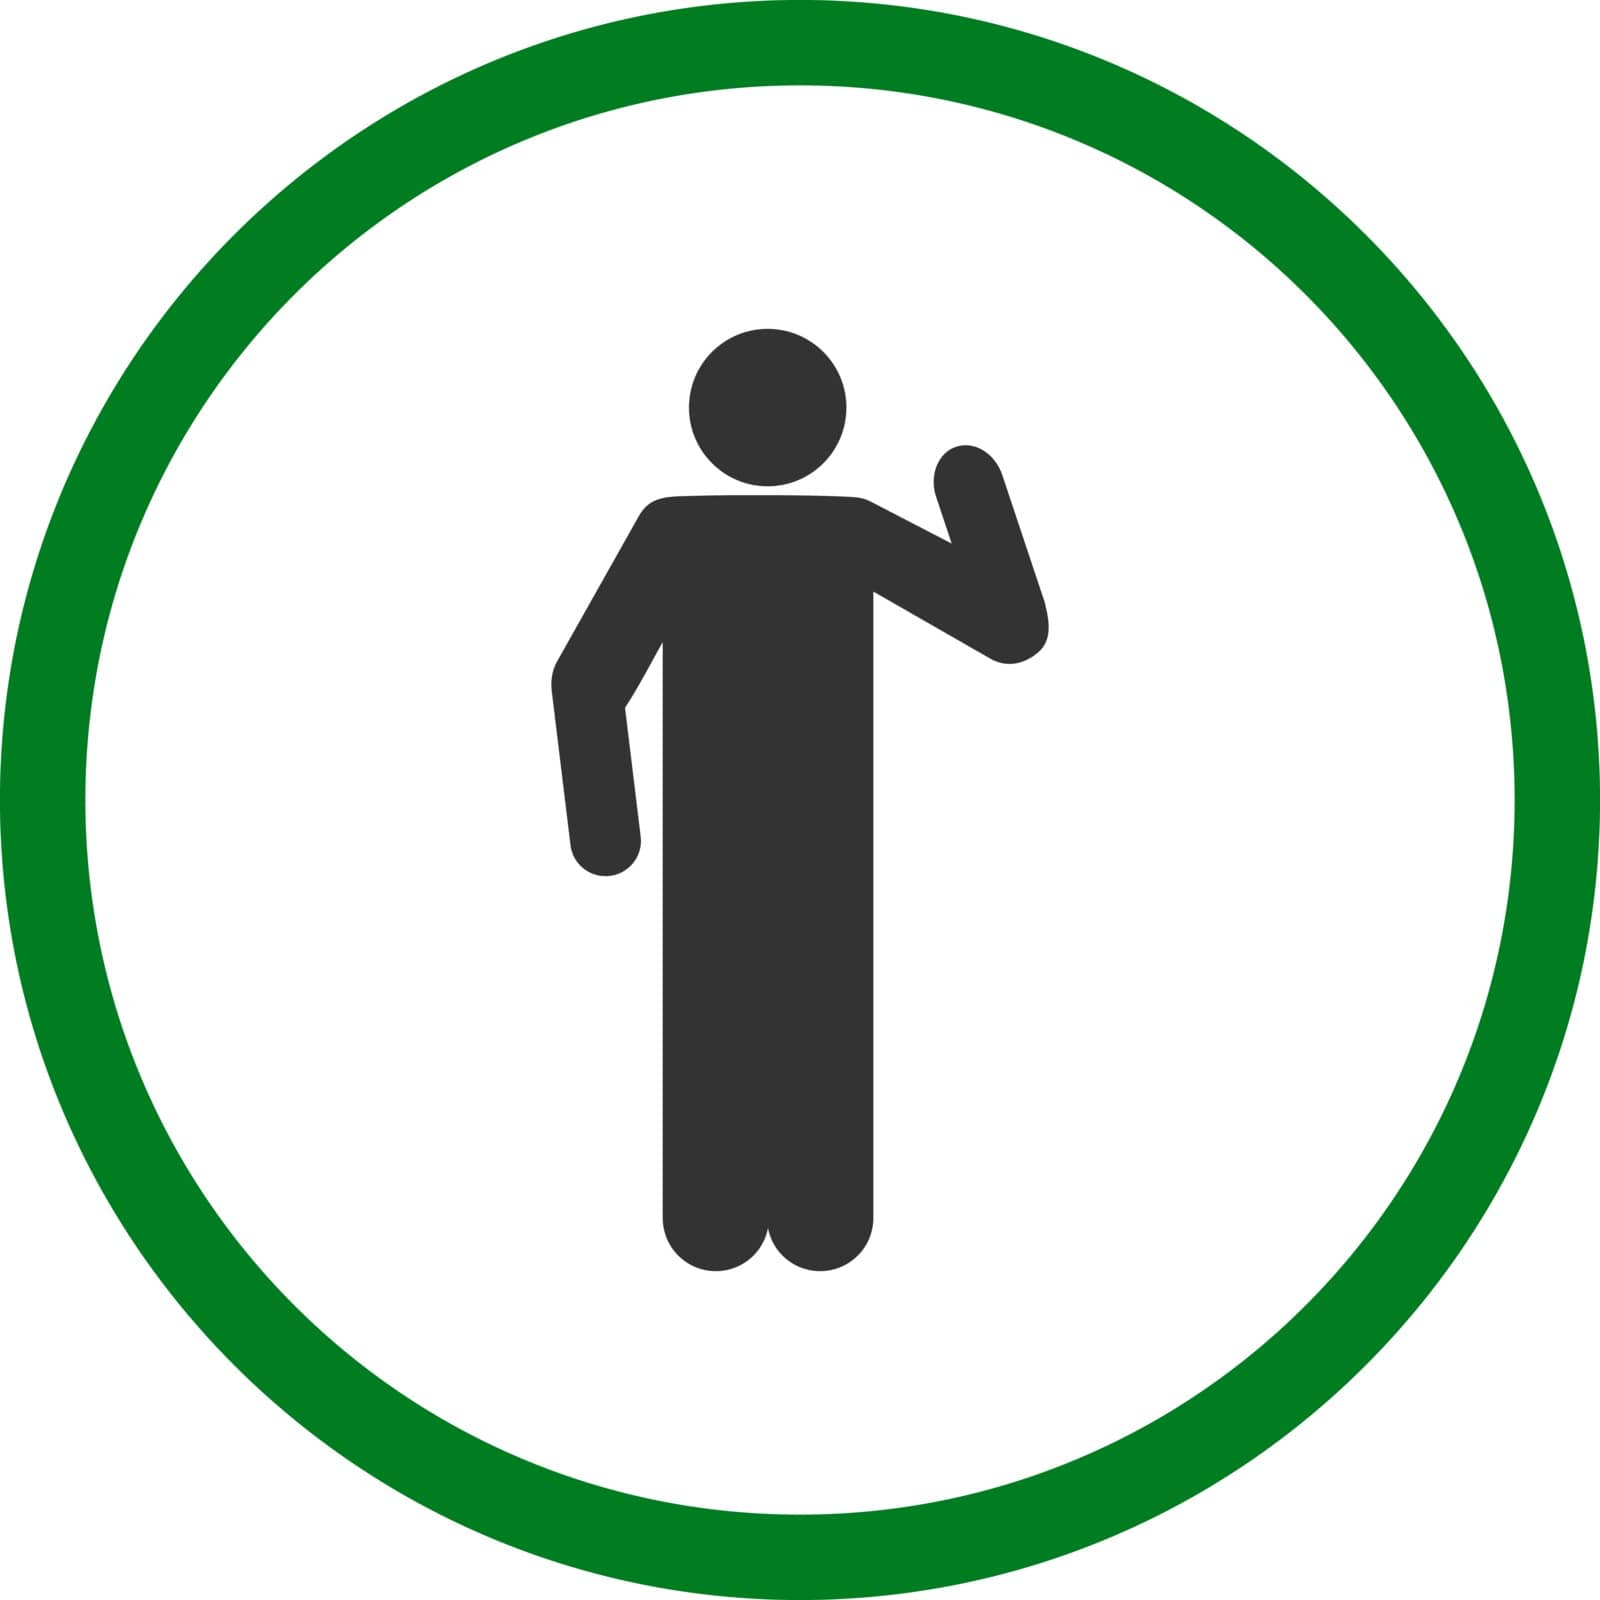 Opinion vector icon. This rounded flat symbol is drawn with green and gray colors on a white background.